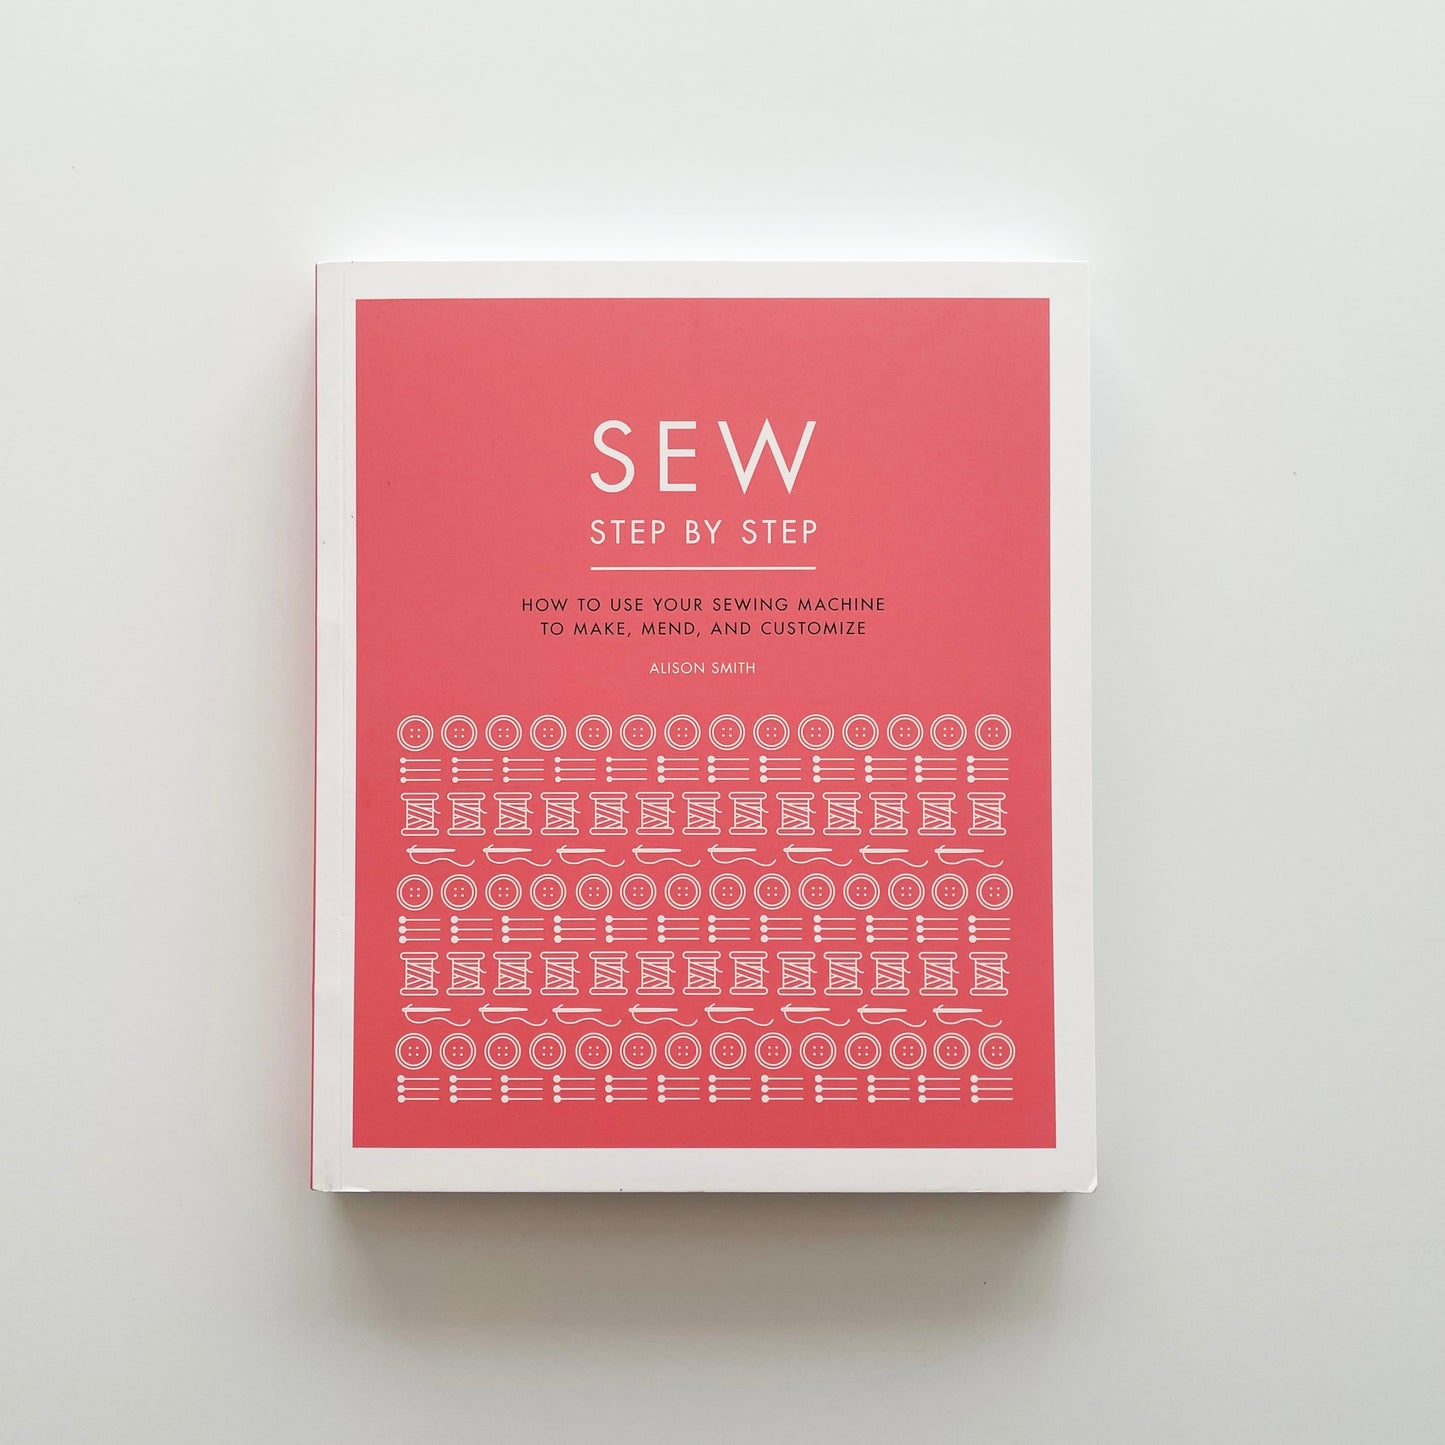 DK Sew Step by Step: How to Use Your Sewing Machine to Make, Mend, and Customize